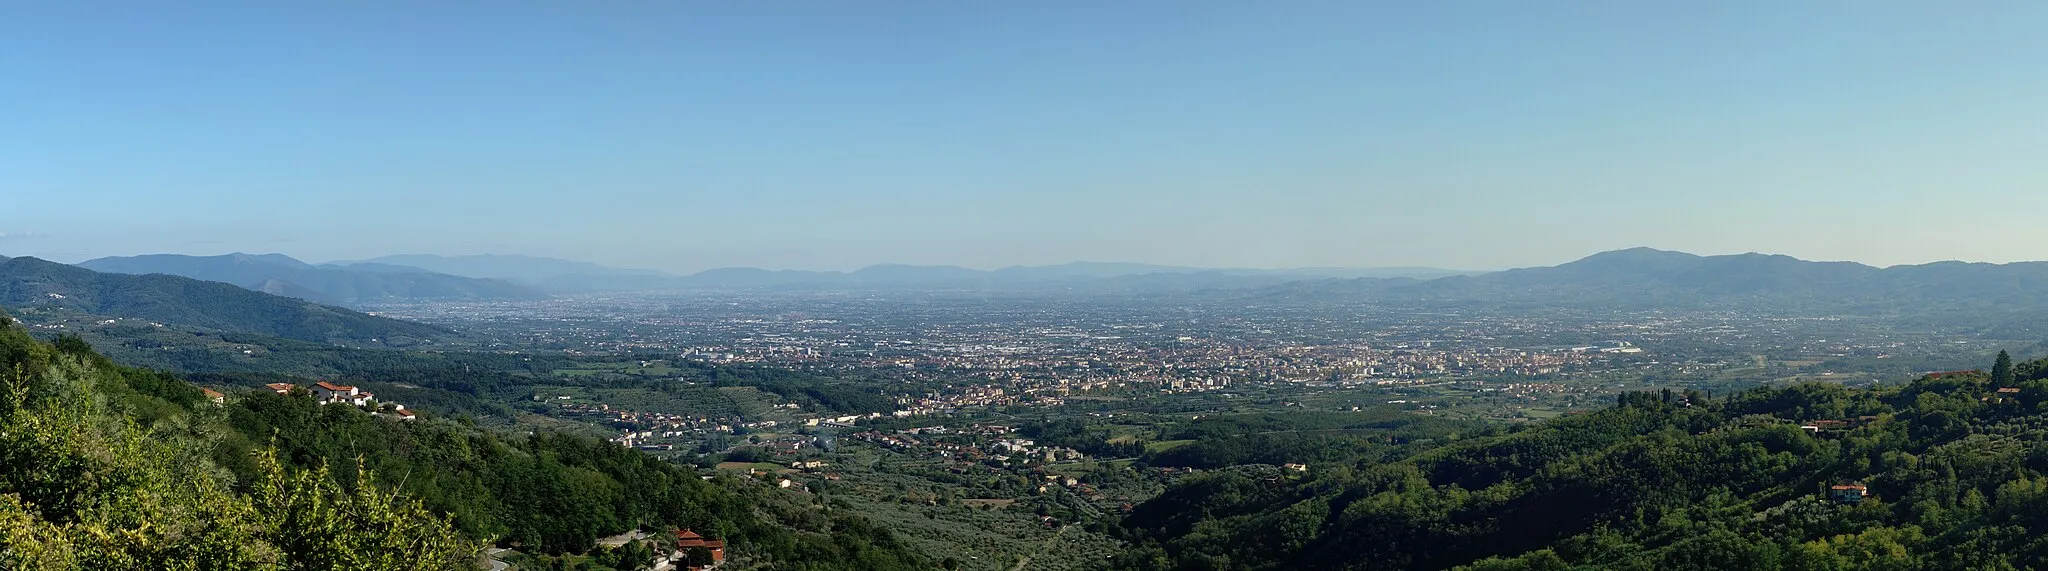 Photo showing: A panorama of Pistoia, Italy, from from the small village of Borghetto. In the background, Prato and Florence are visible.